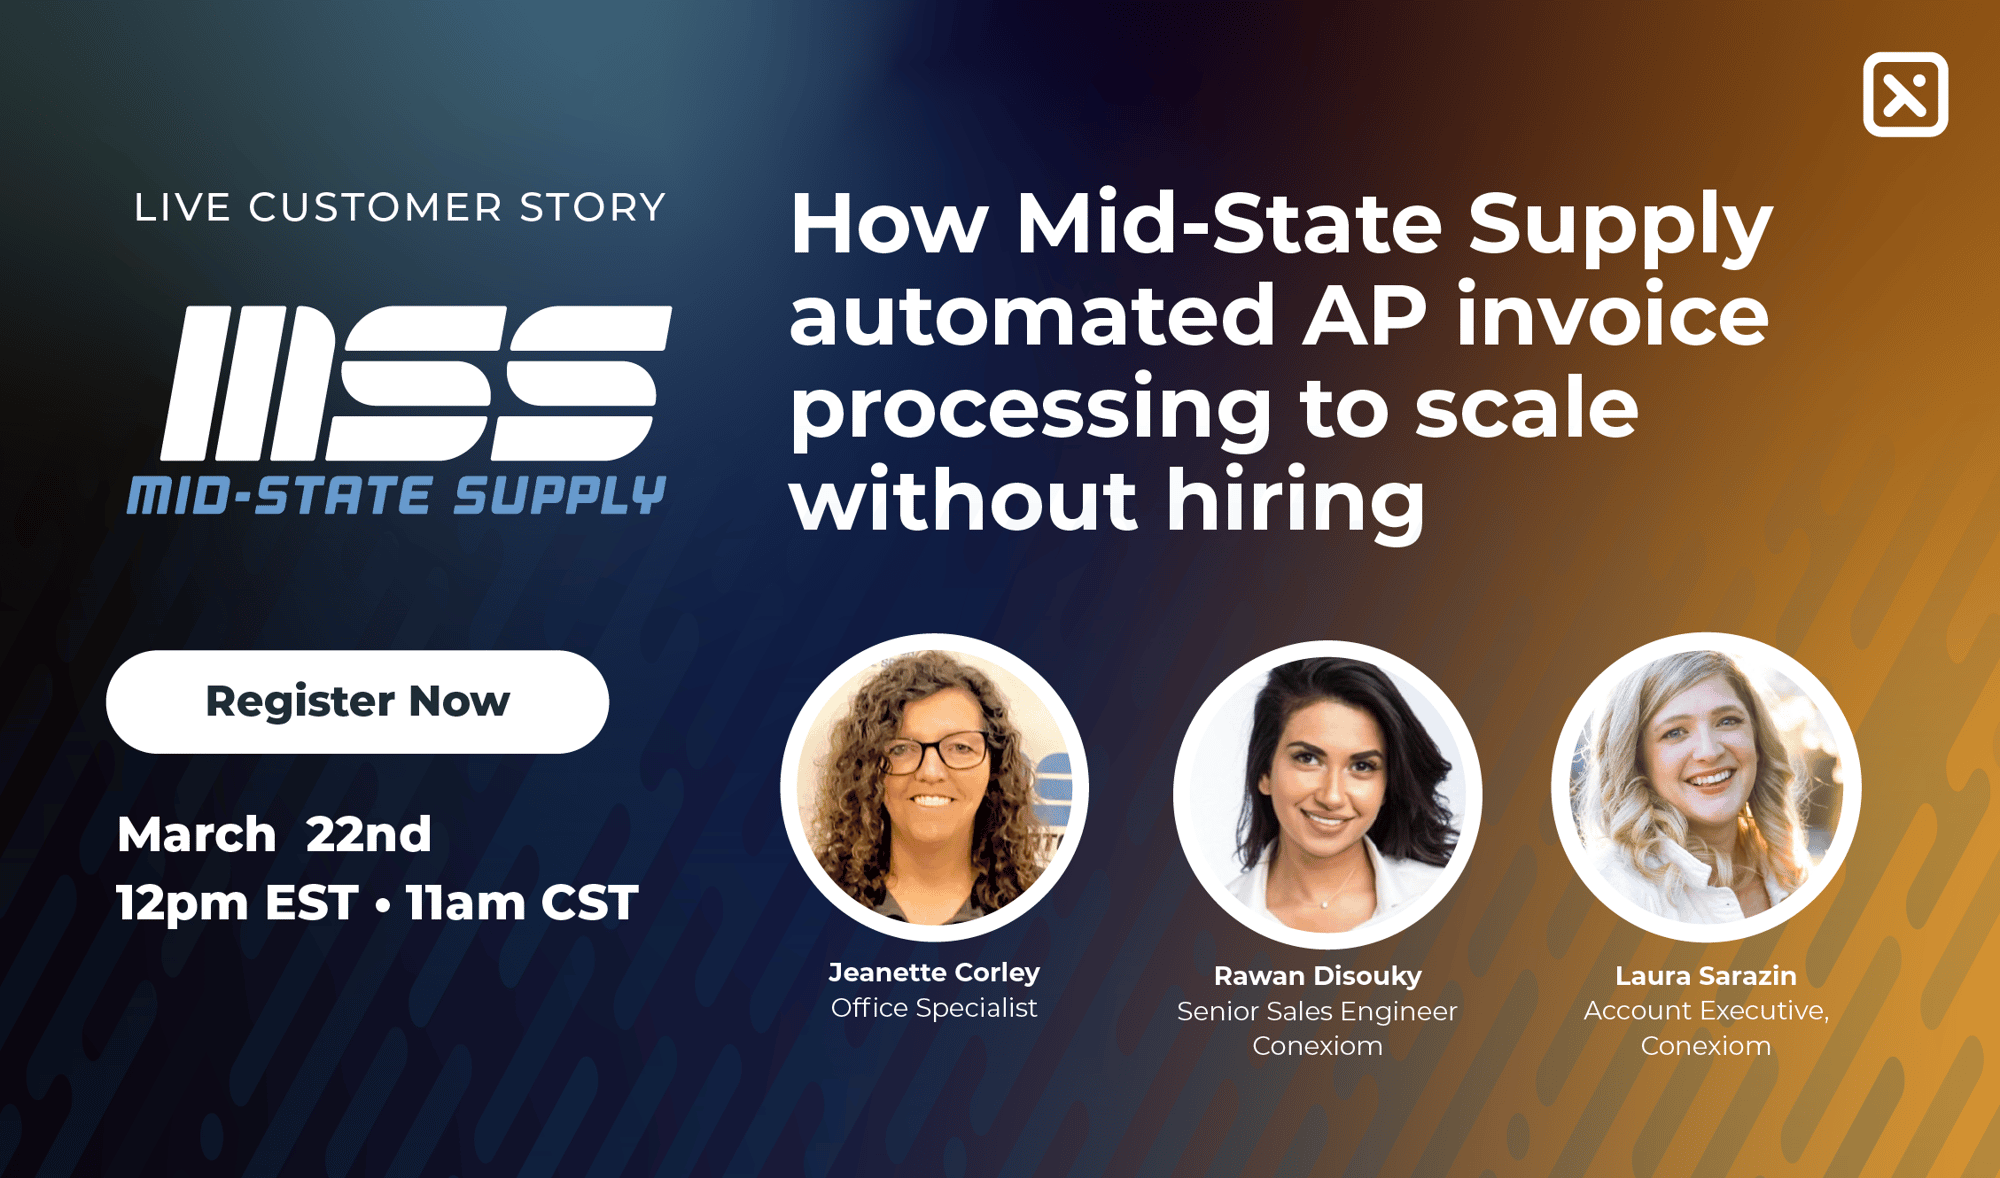 How Mid-State Supply Automated AP Invoice Processing to Scale without Hiring